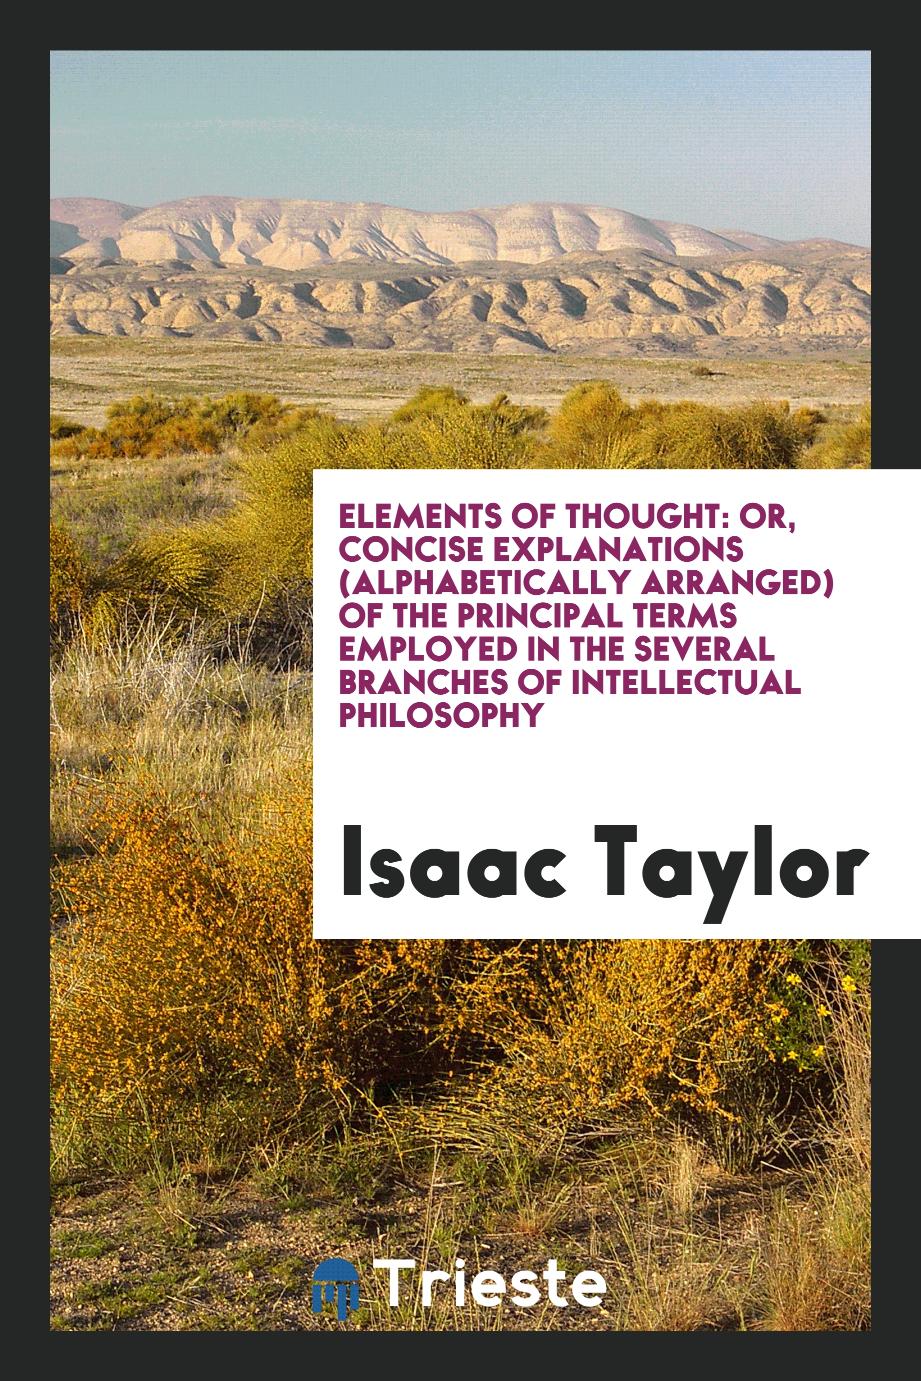 Elements of Thought: Or, Concise Explanations (Alphabetically Arranged) of the Principal Terms Employed in the Several Branches of Intellectual Philosophy